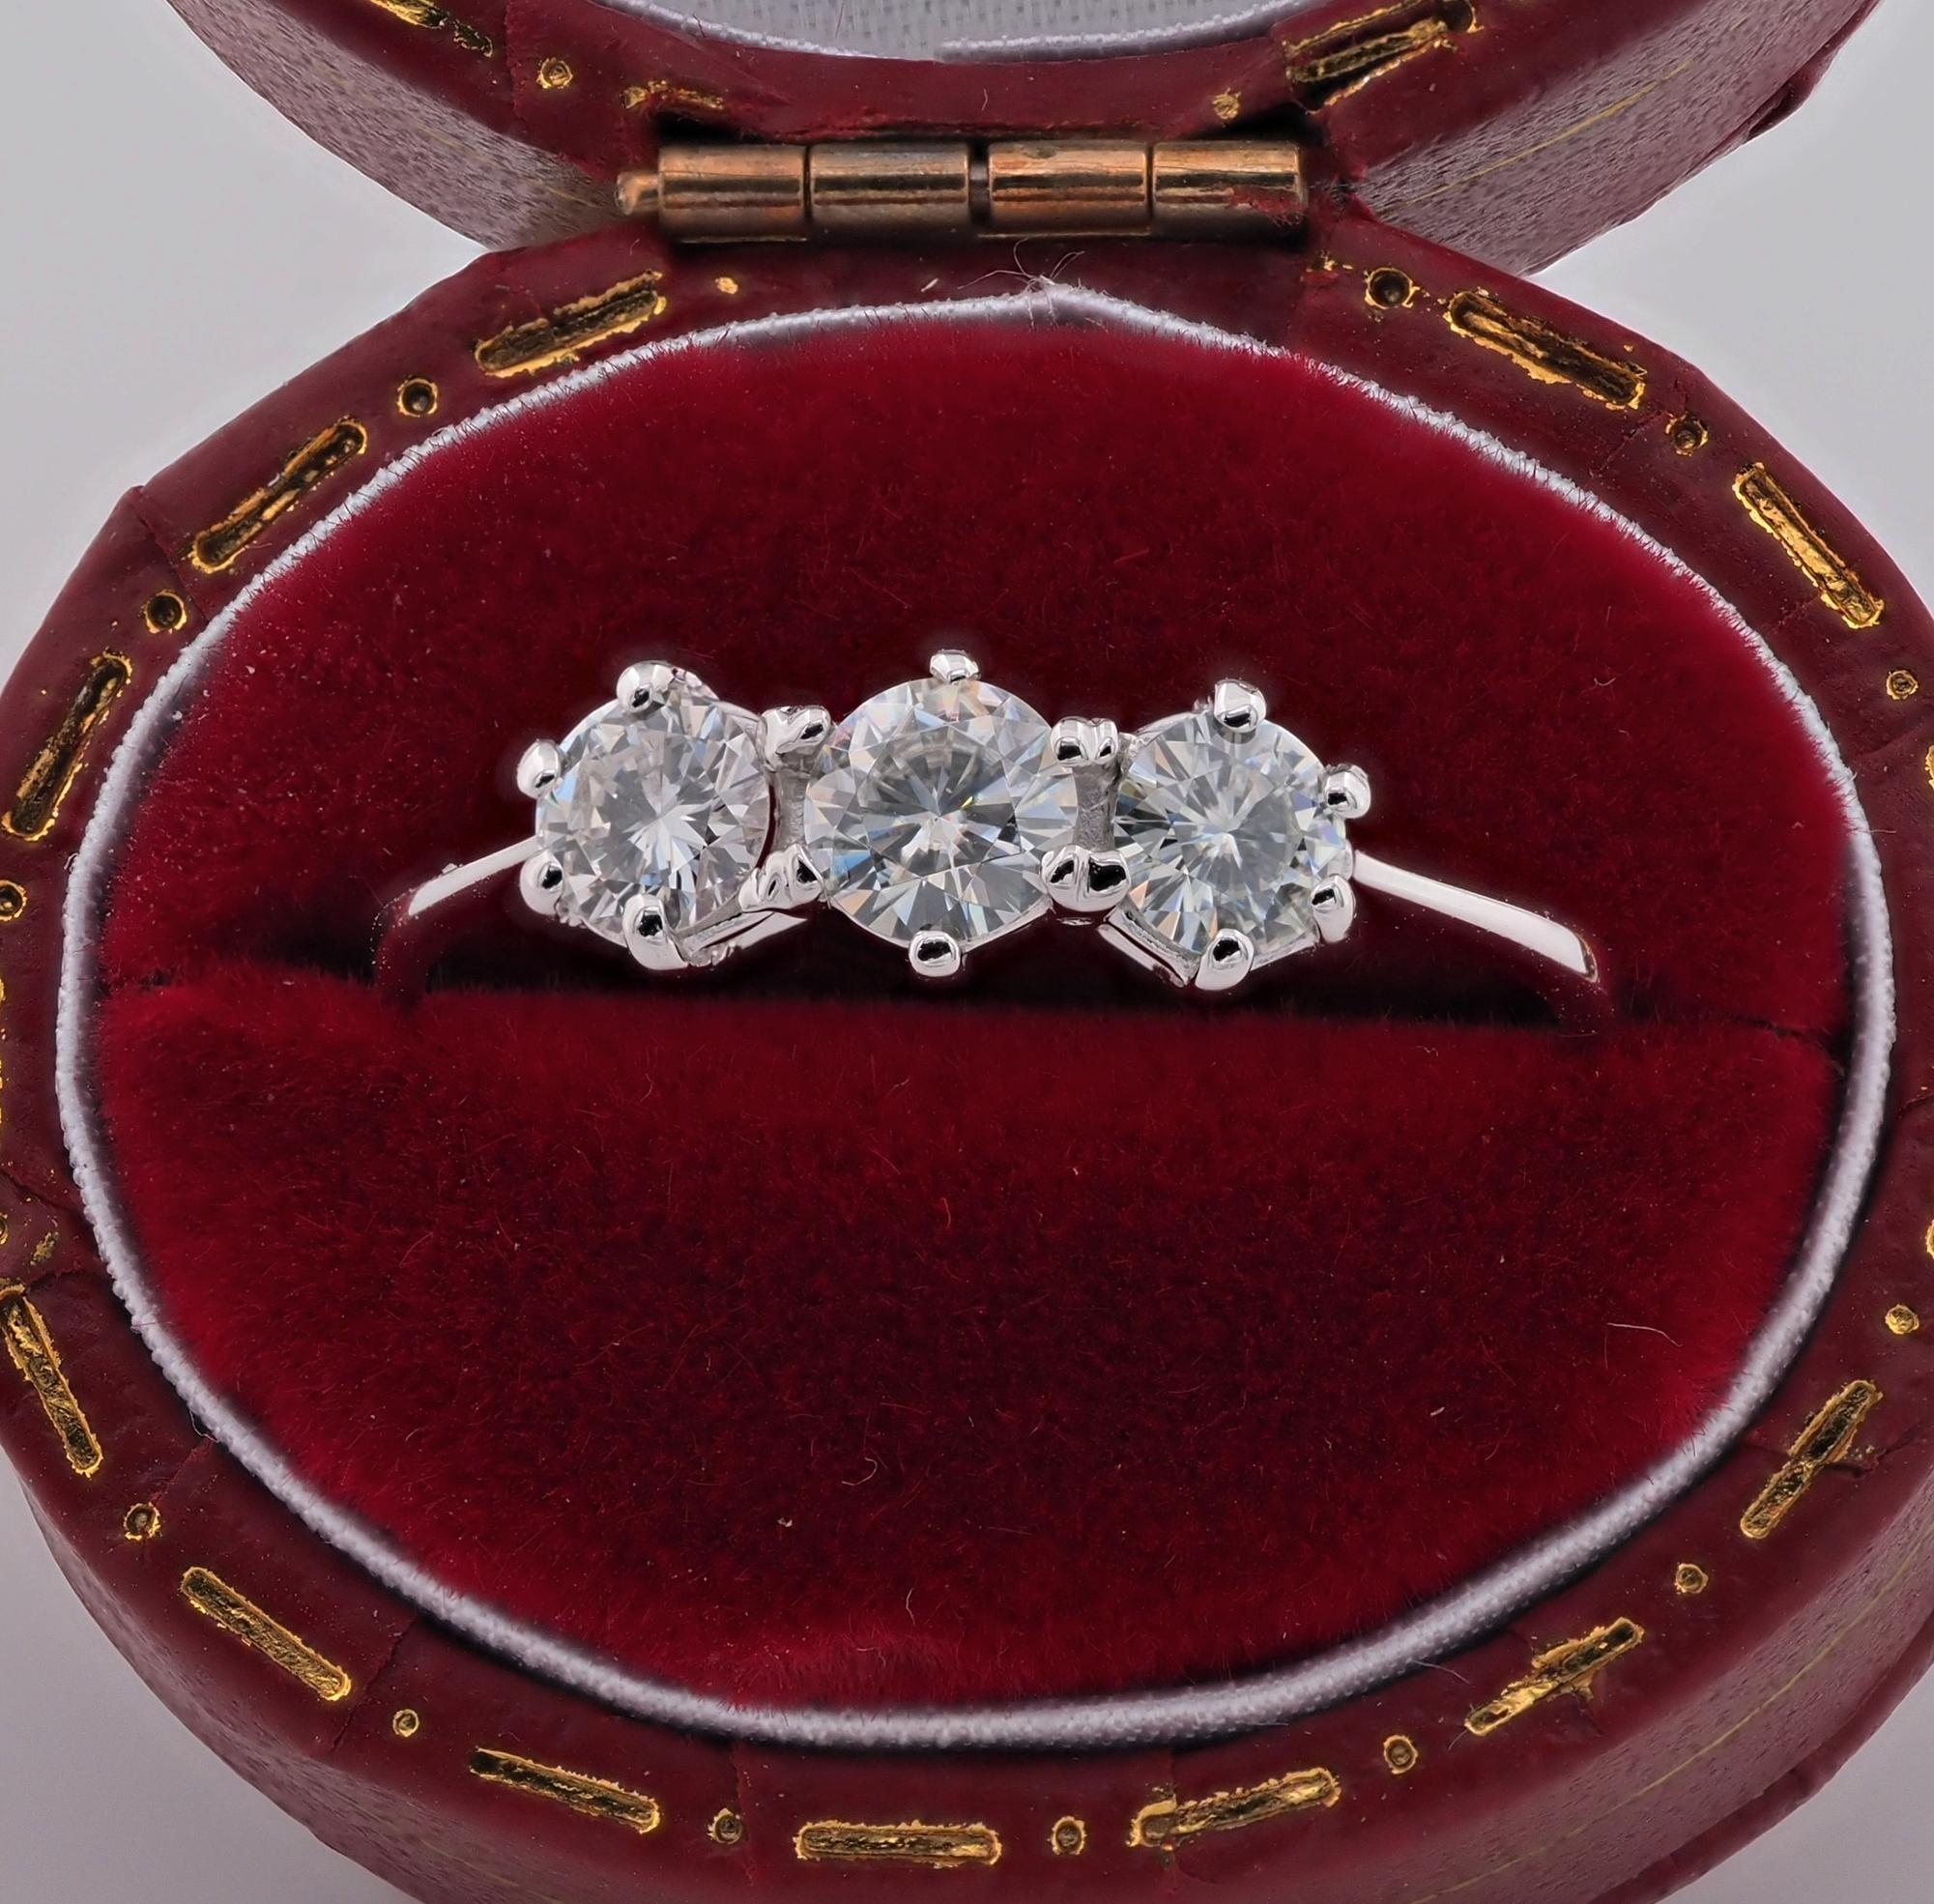 Trilogy composition for this gorgeously hand made with low profile Diamond setting 1940/1950 ca – ring is hand crafted of solid 18 KT gold, marked
Three stone Diamond stand for yesterday, today, tomorrow, meaningful love composition for engagement,